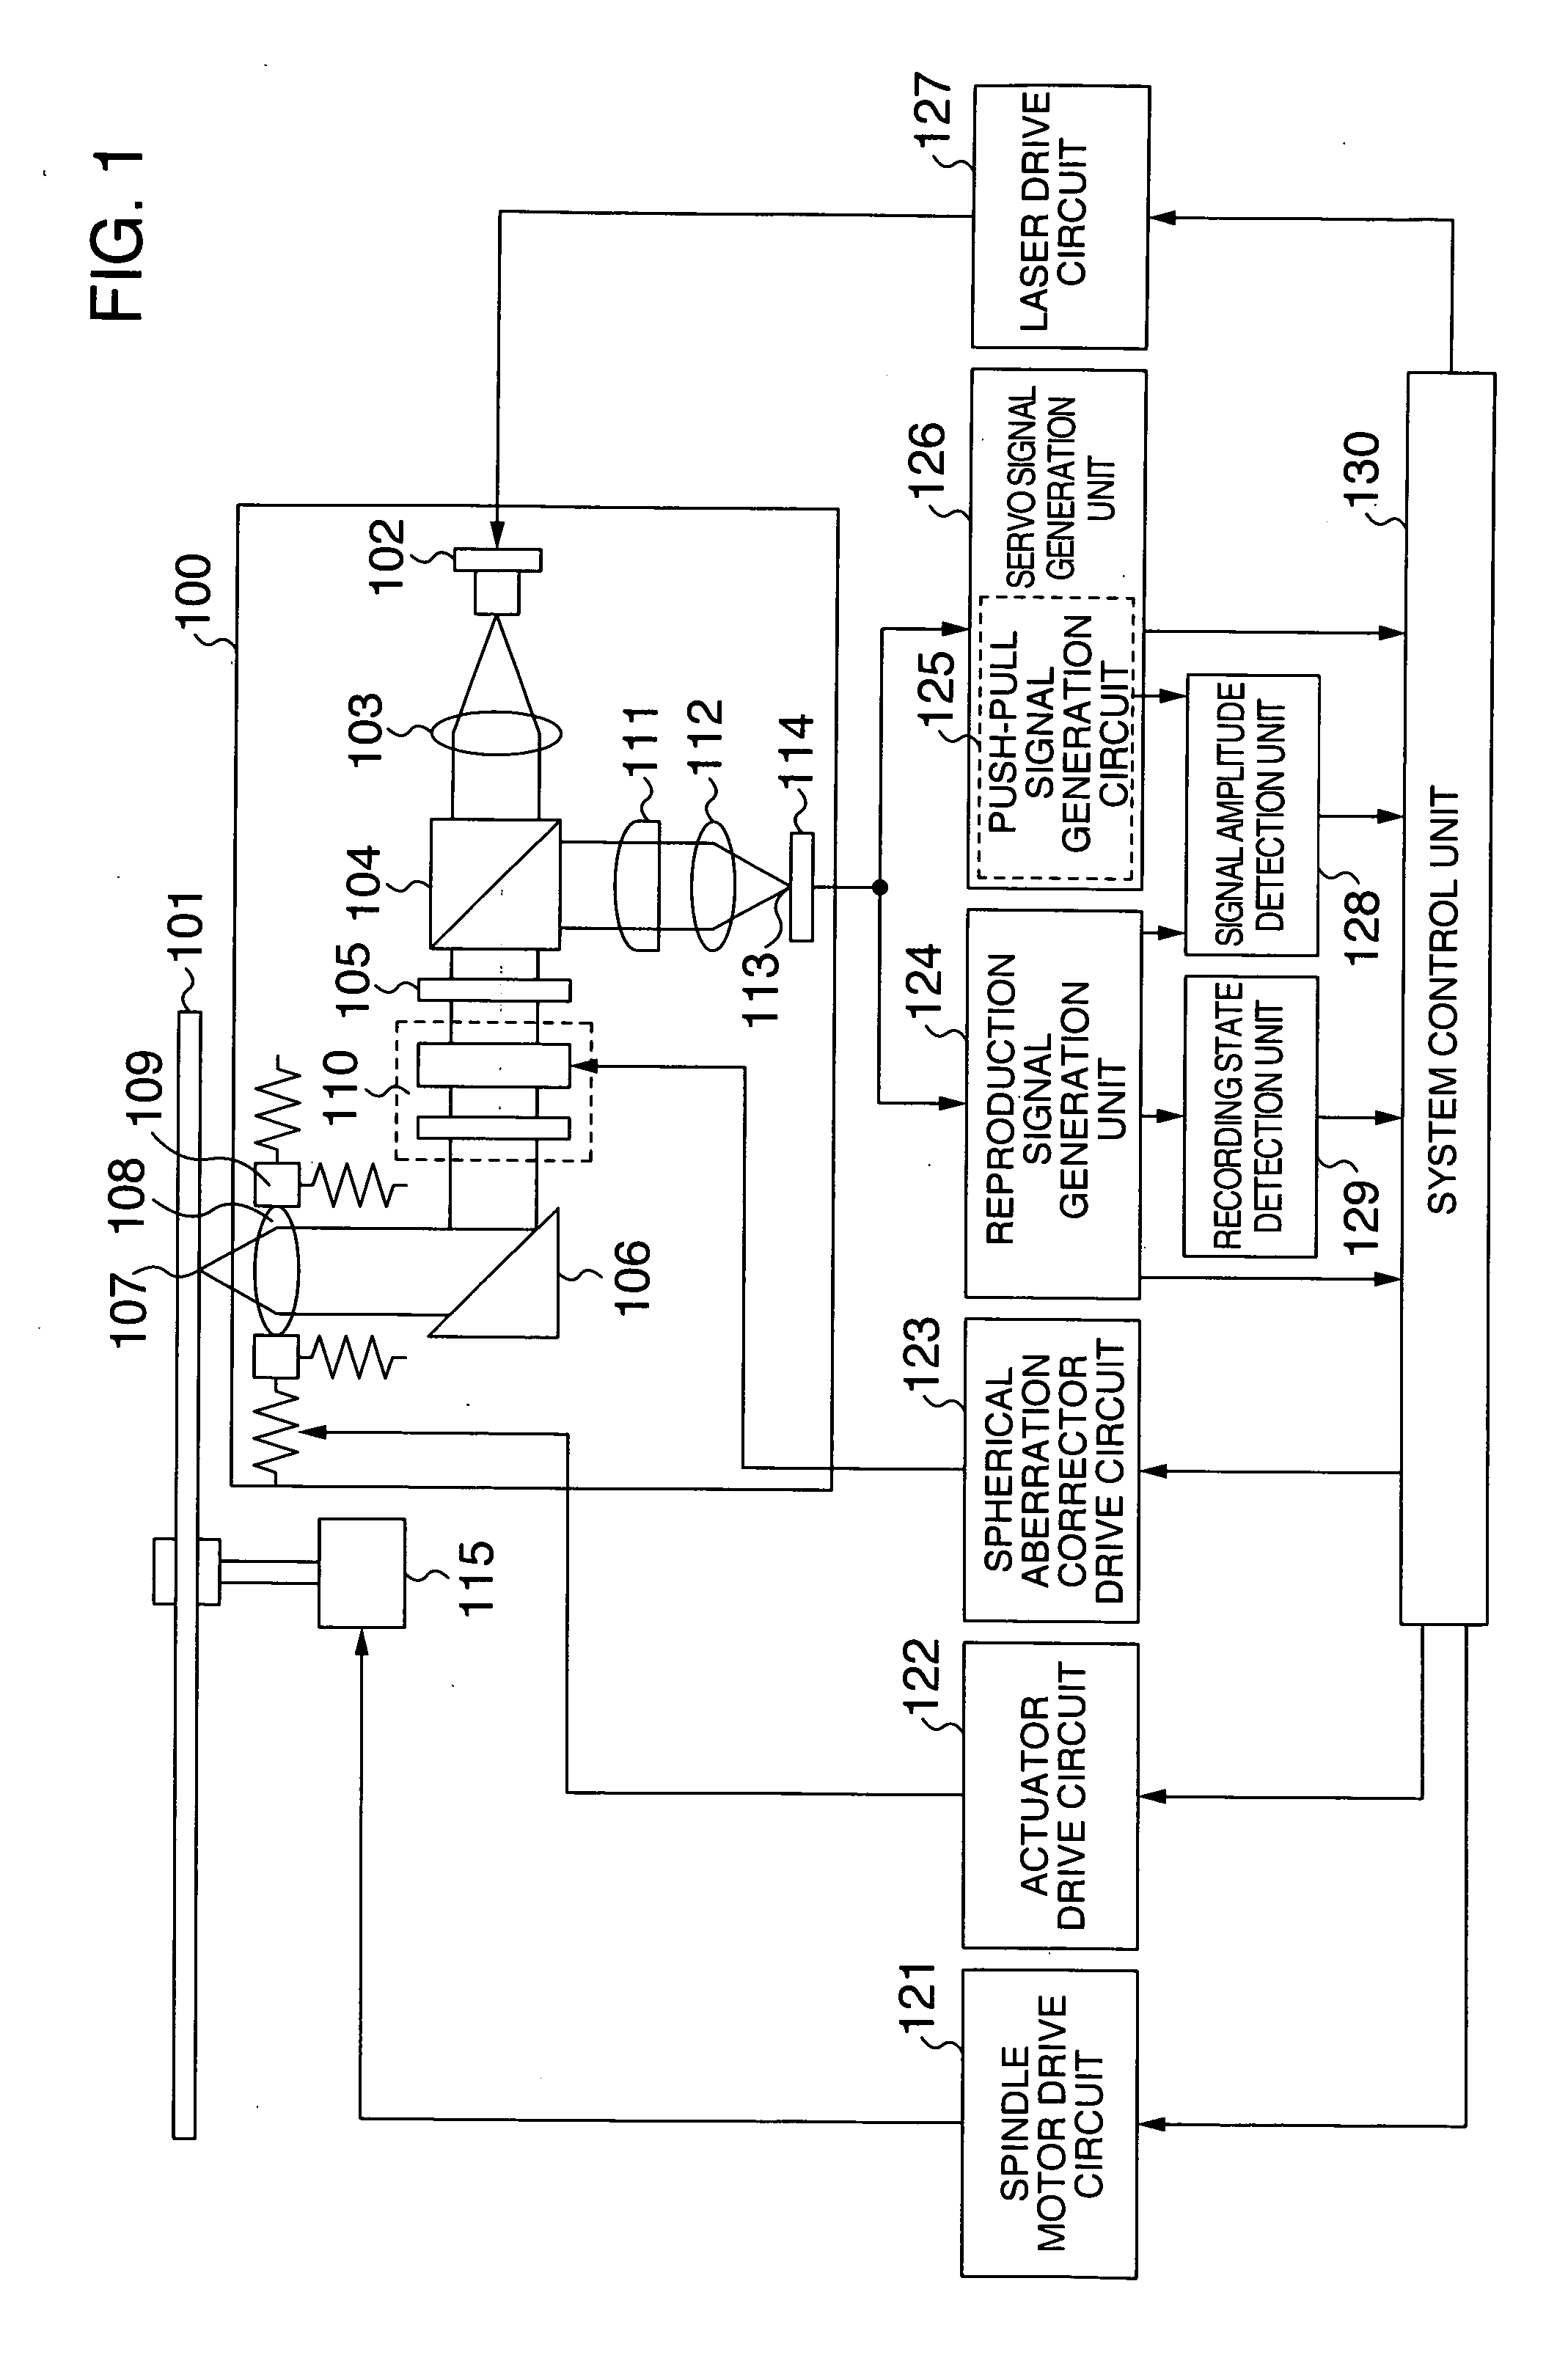 Optical disc recording/reproduction device